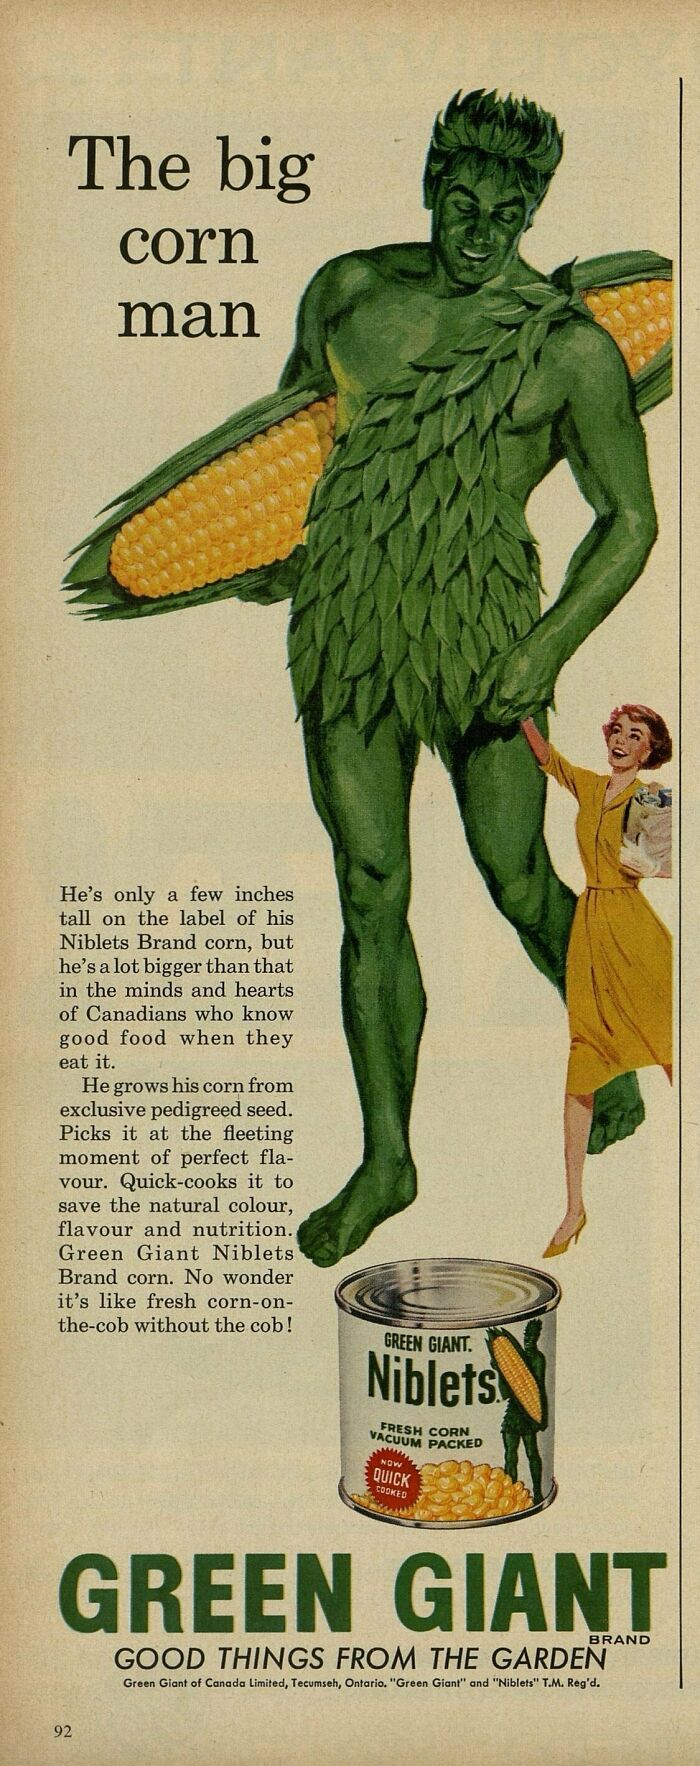 Green Giant Niblets, 1963